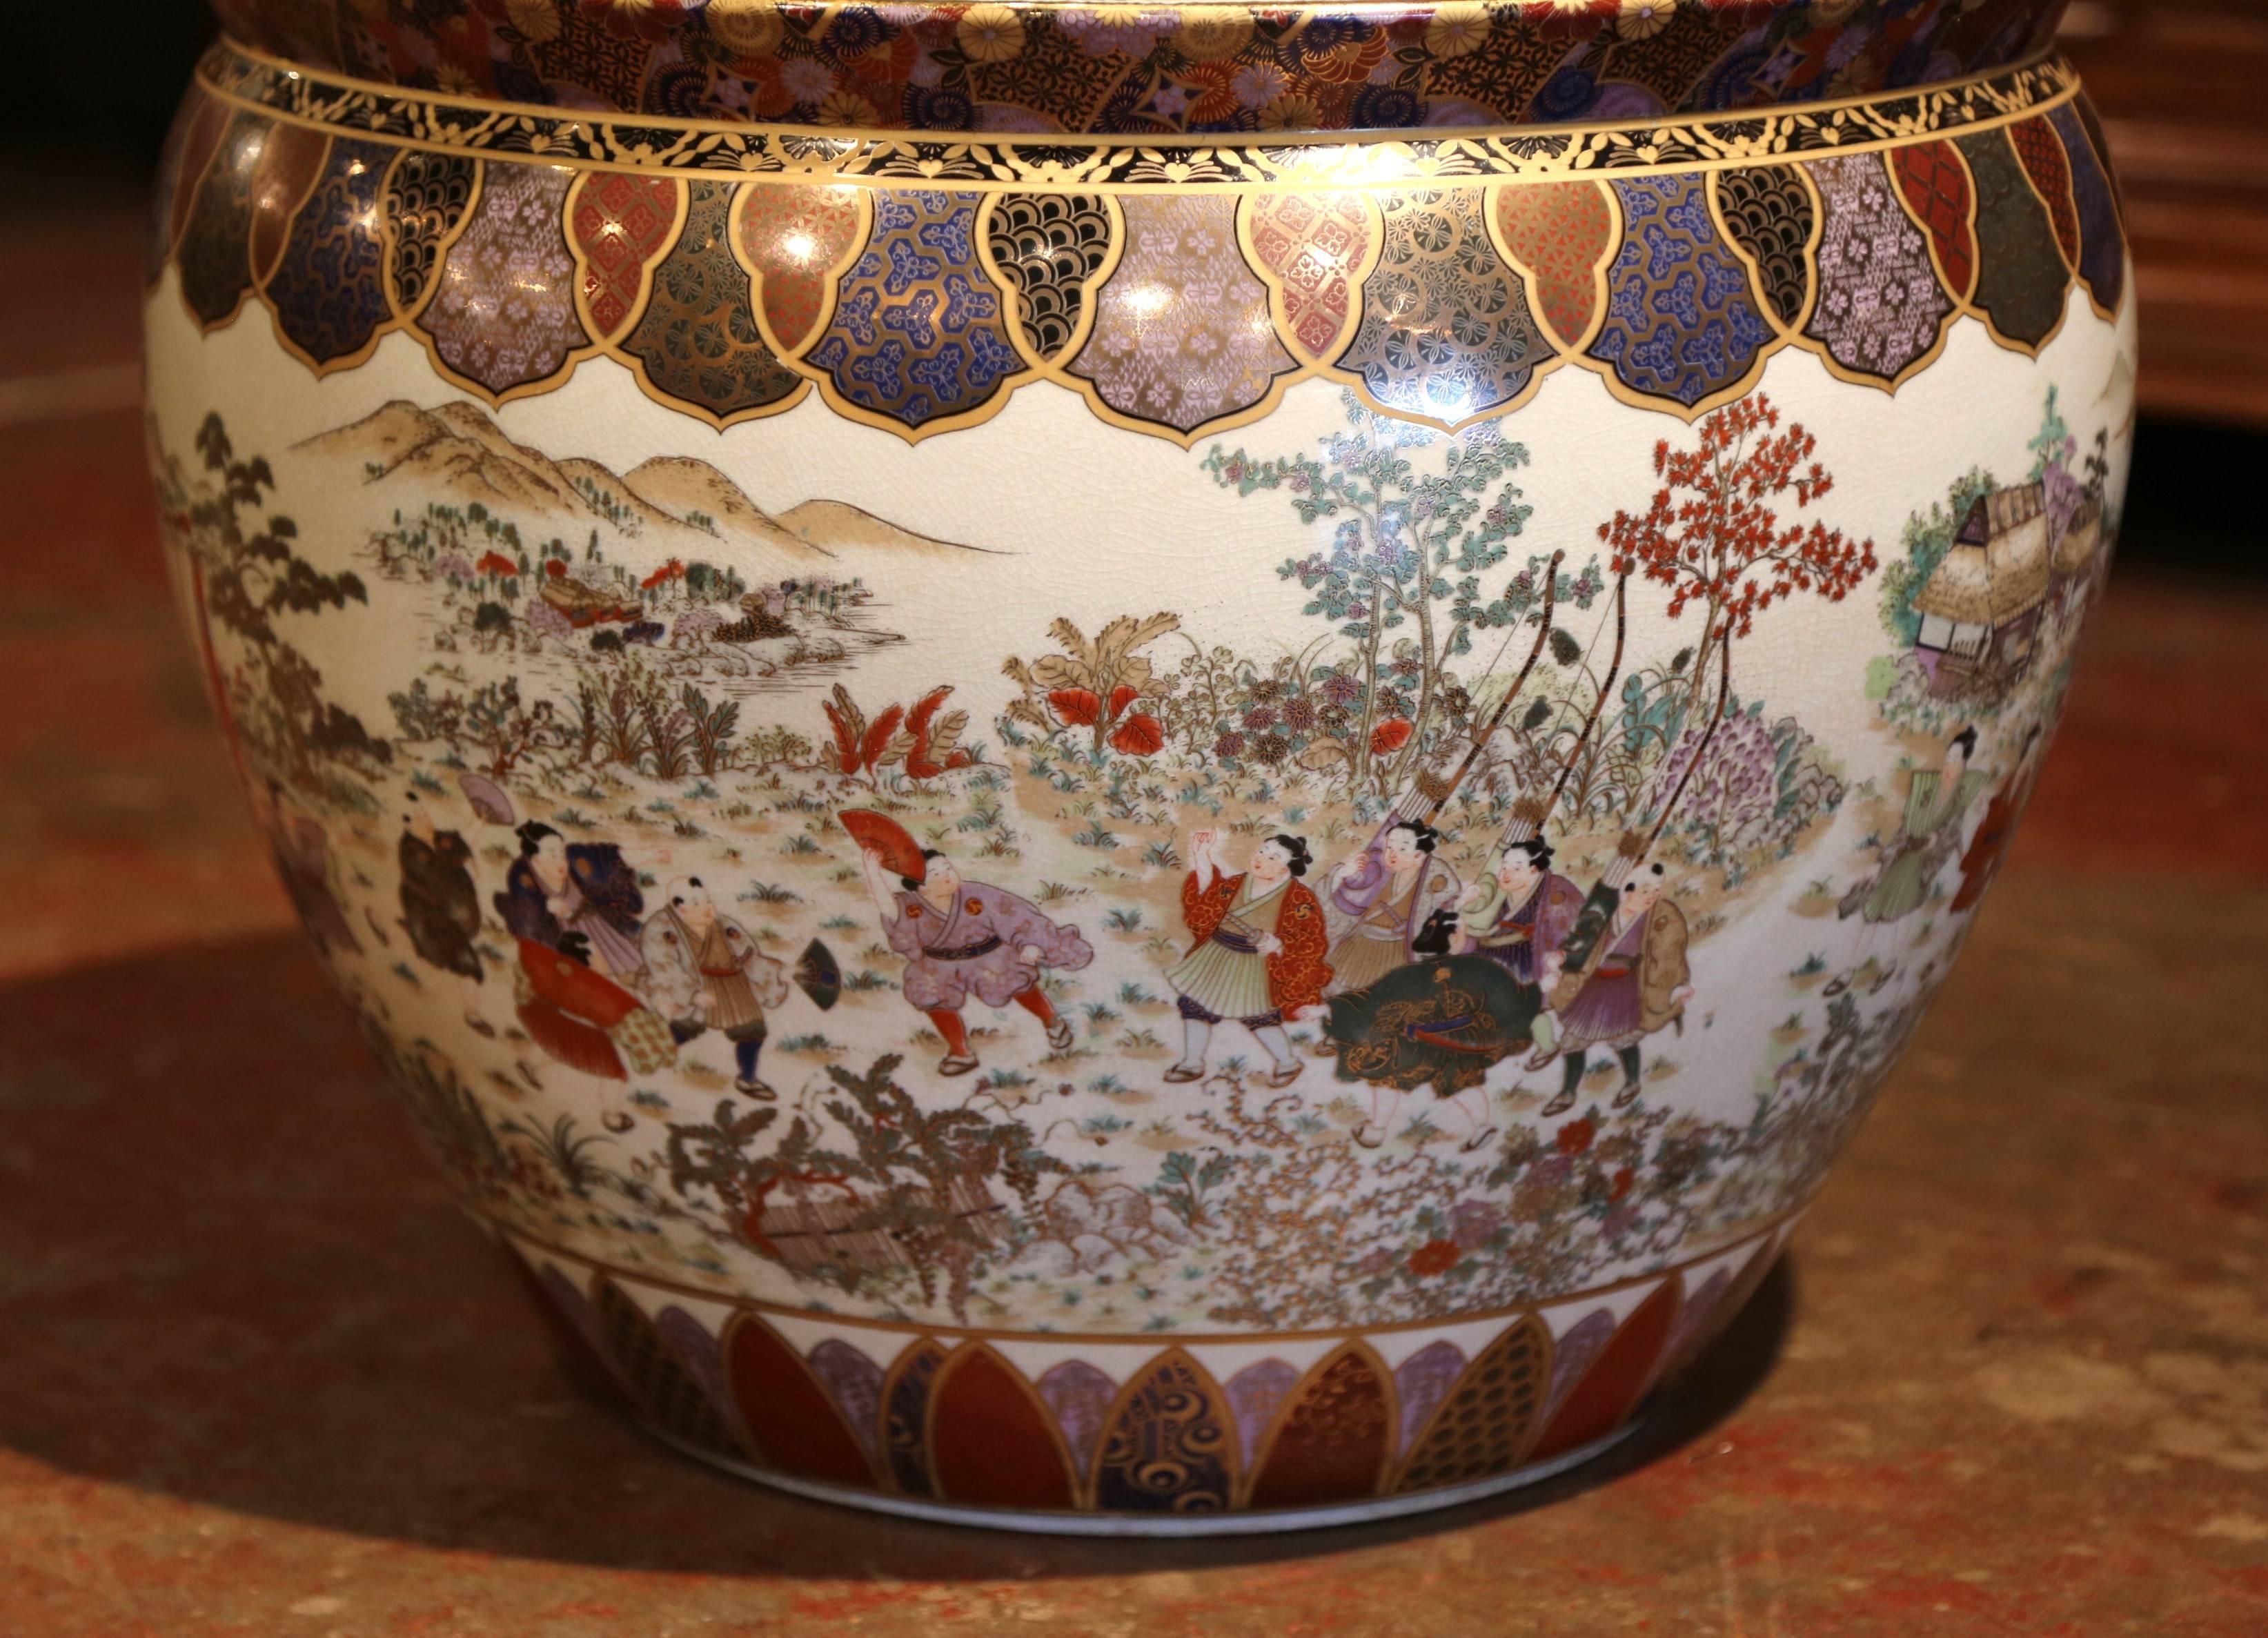 20th Century Large Porcelain Chinese Fishbowl Planter with Classic Oriental Decorations